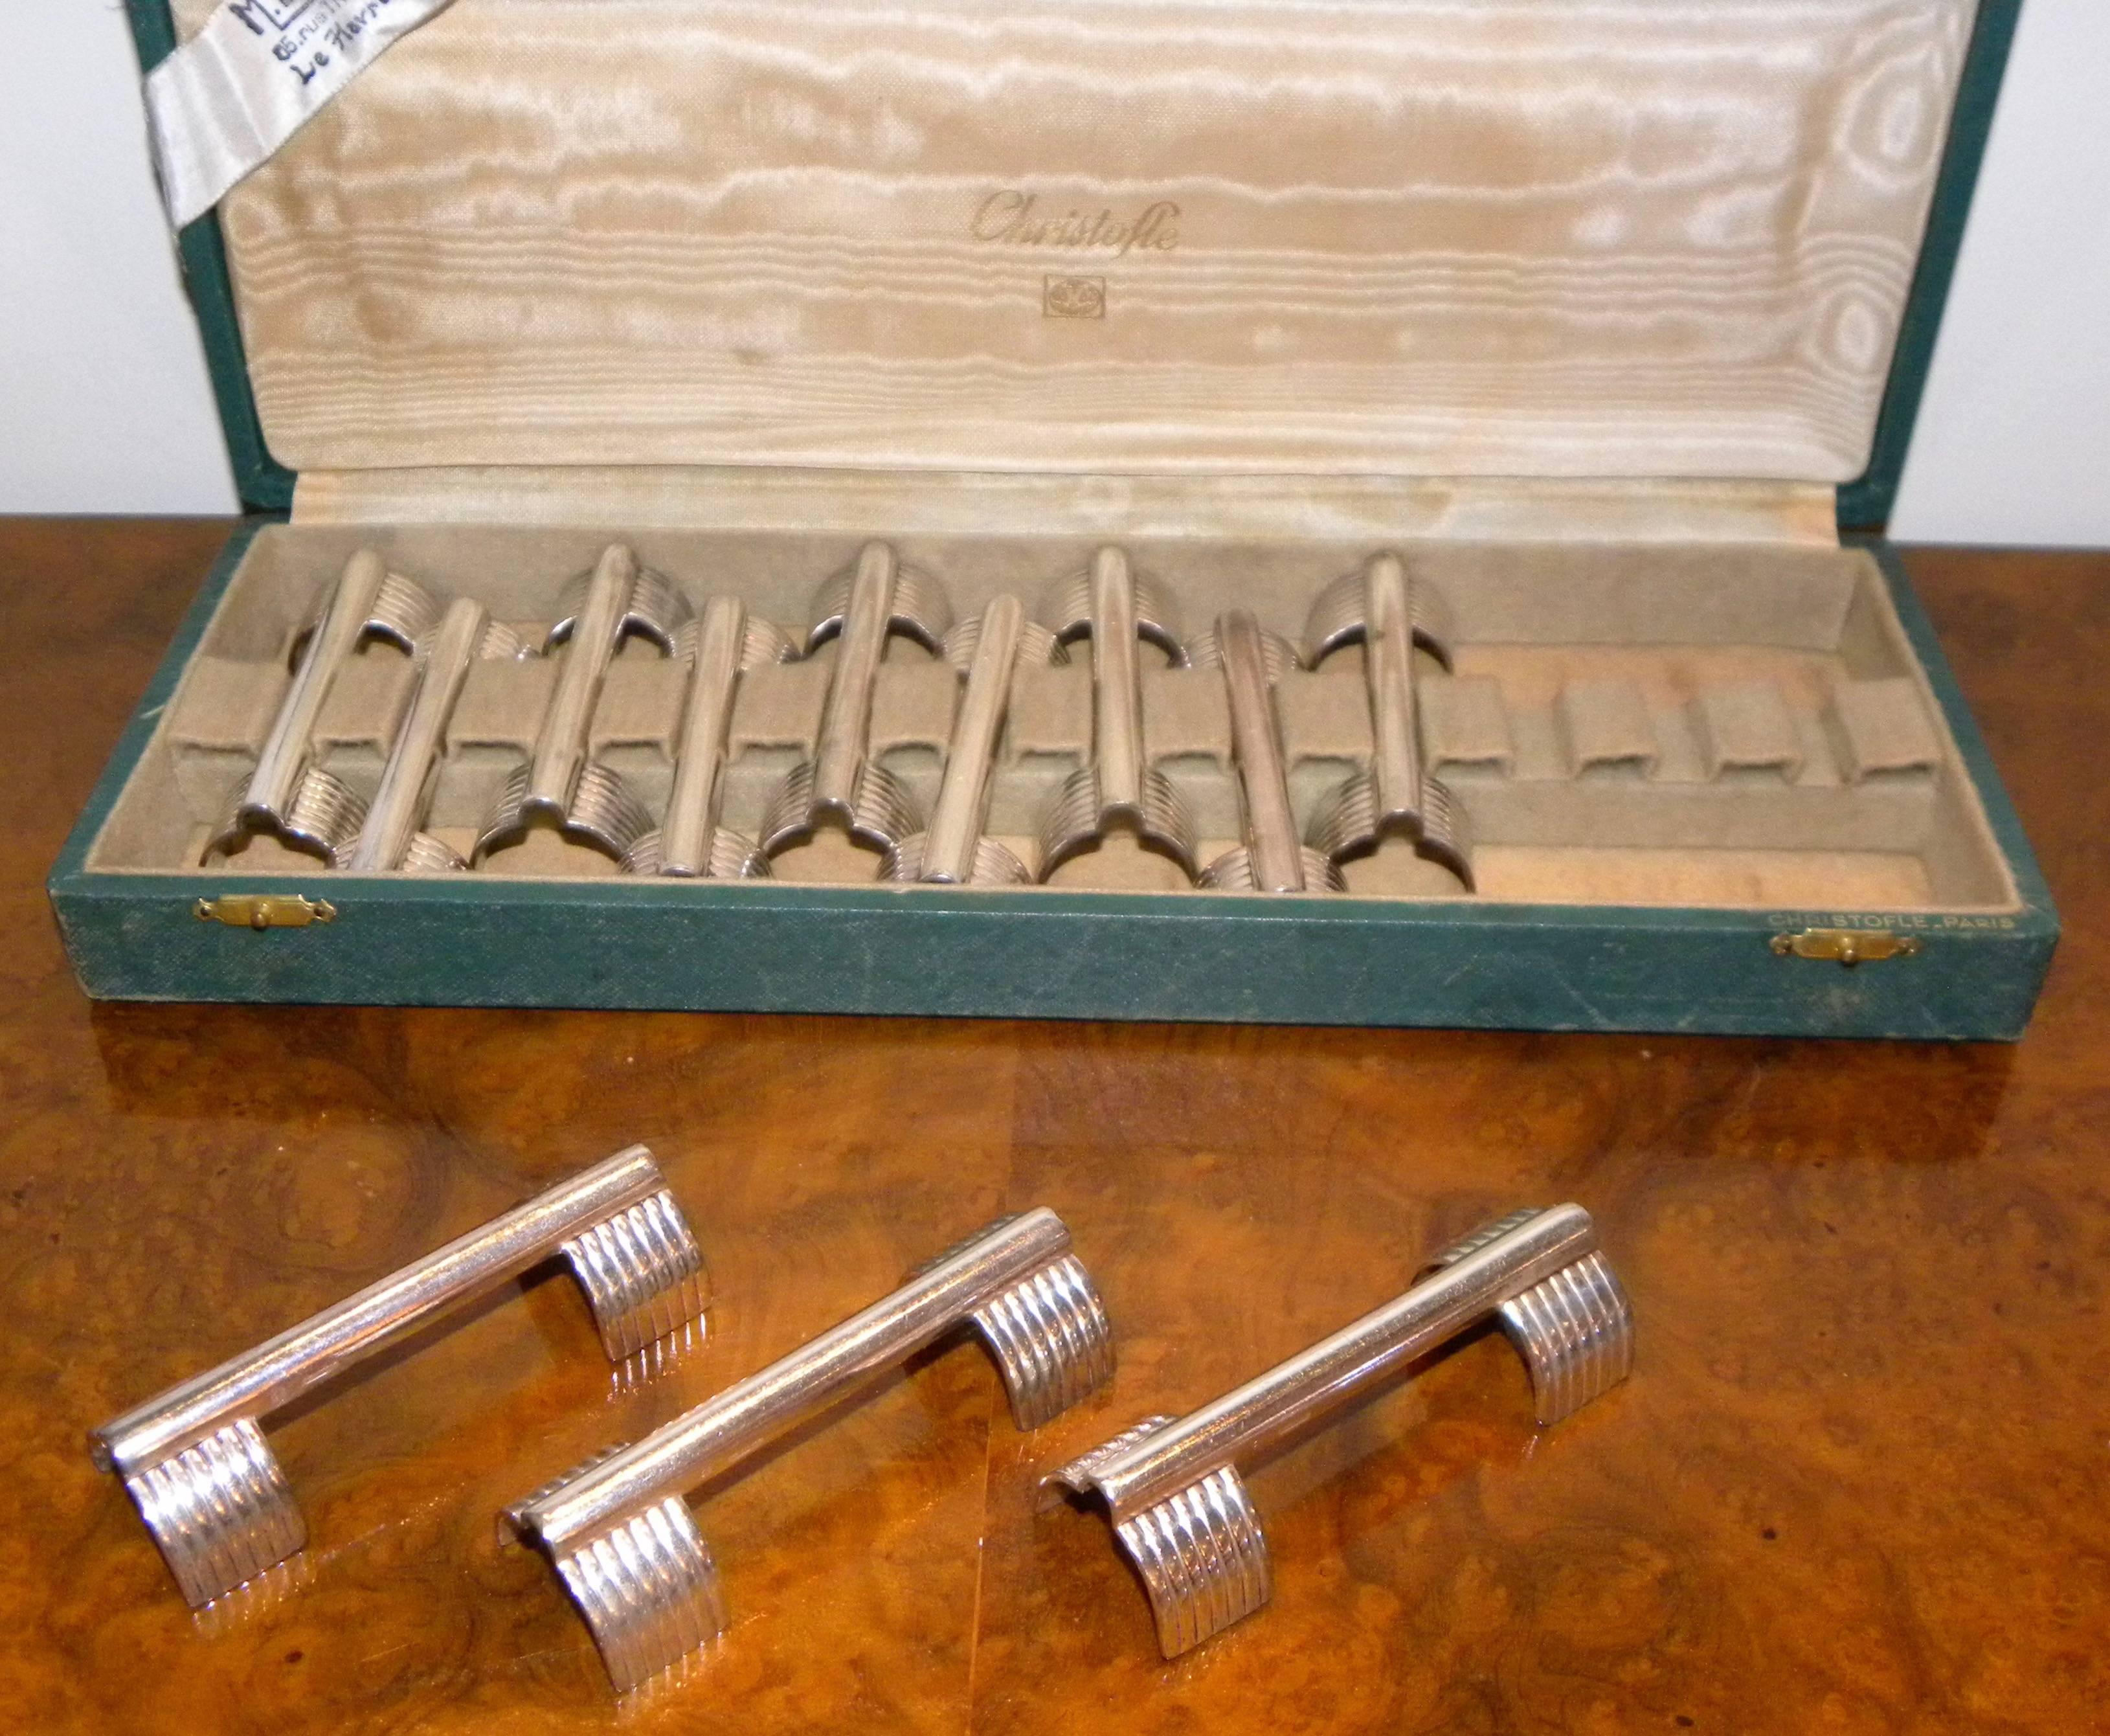 12 original Christofle knife rests complete in original box. This is a very modern design from the 1930s attributed to Luc Lanel who did so much of the most memorial and collectible tableware for Christofle during this period.

The design is